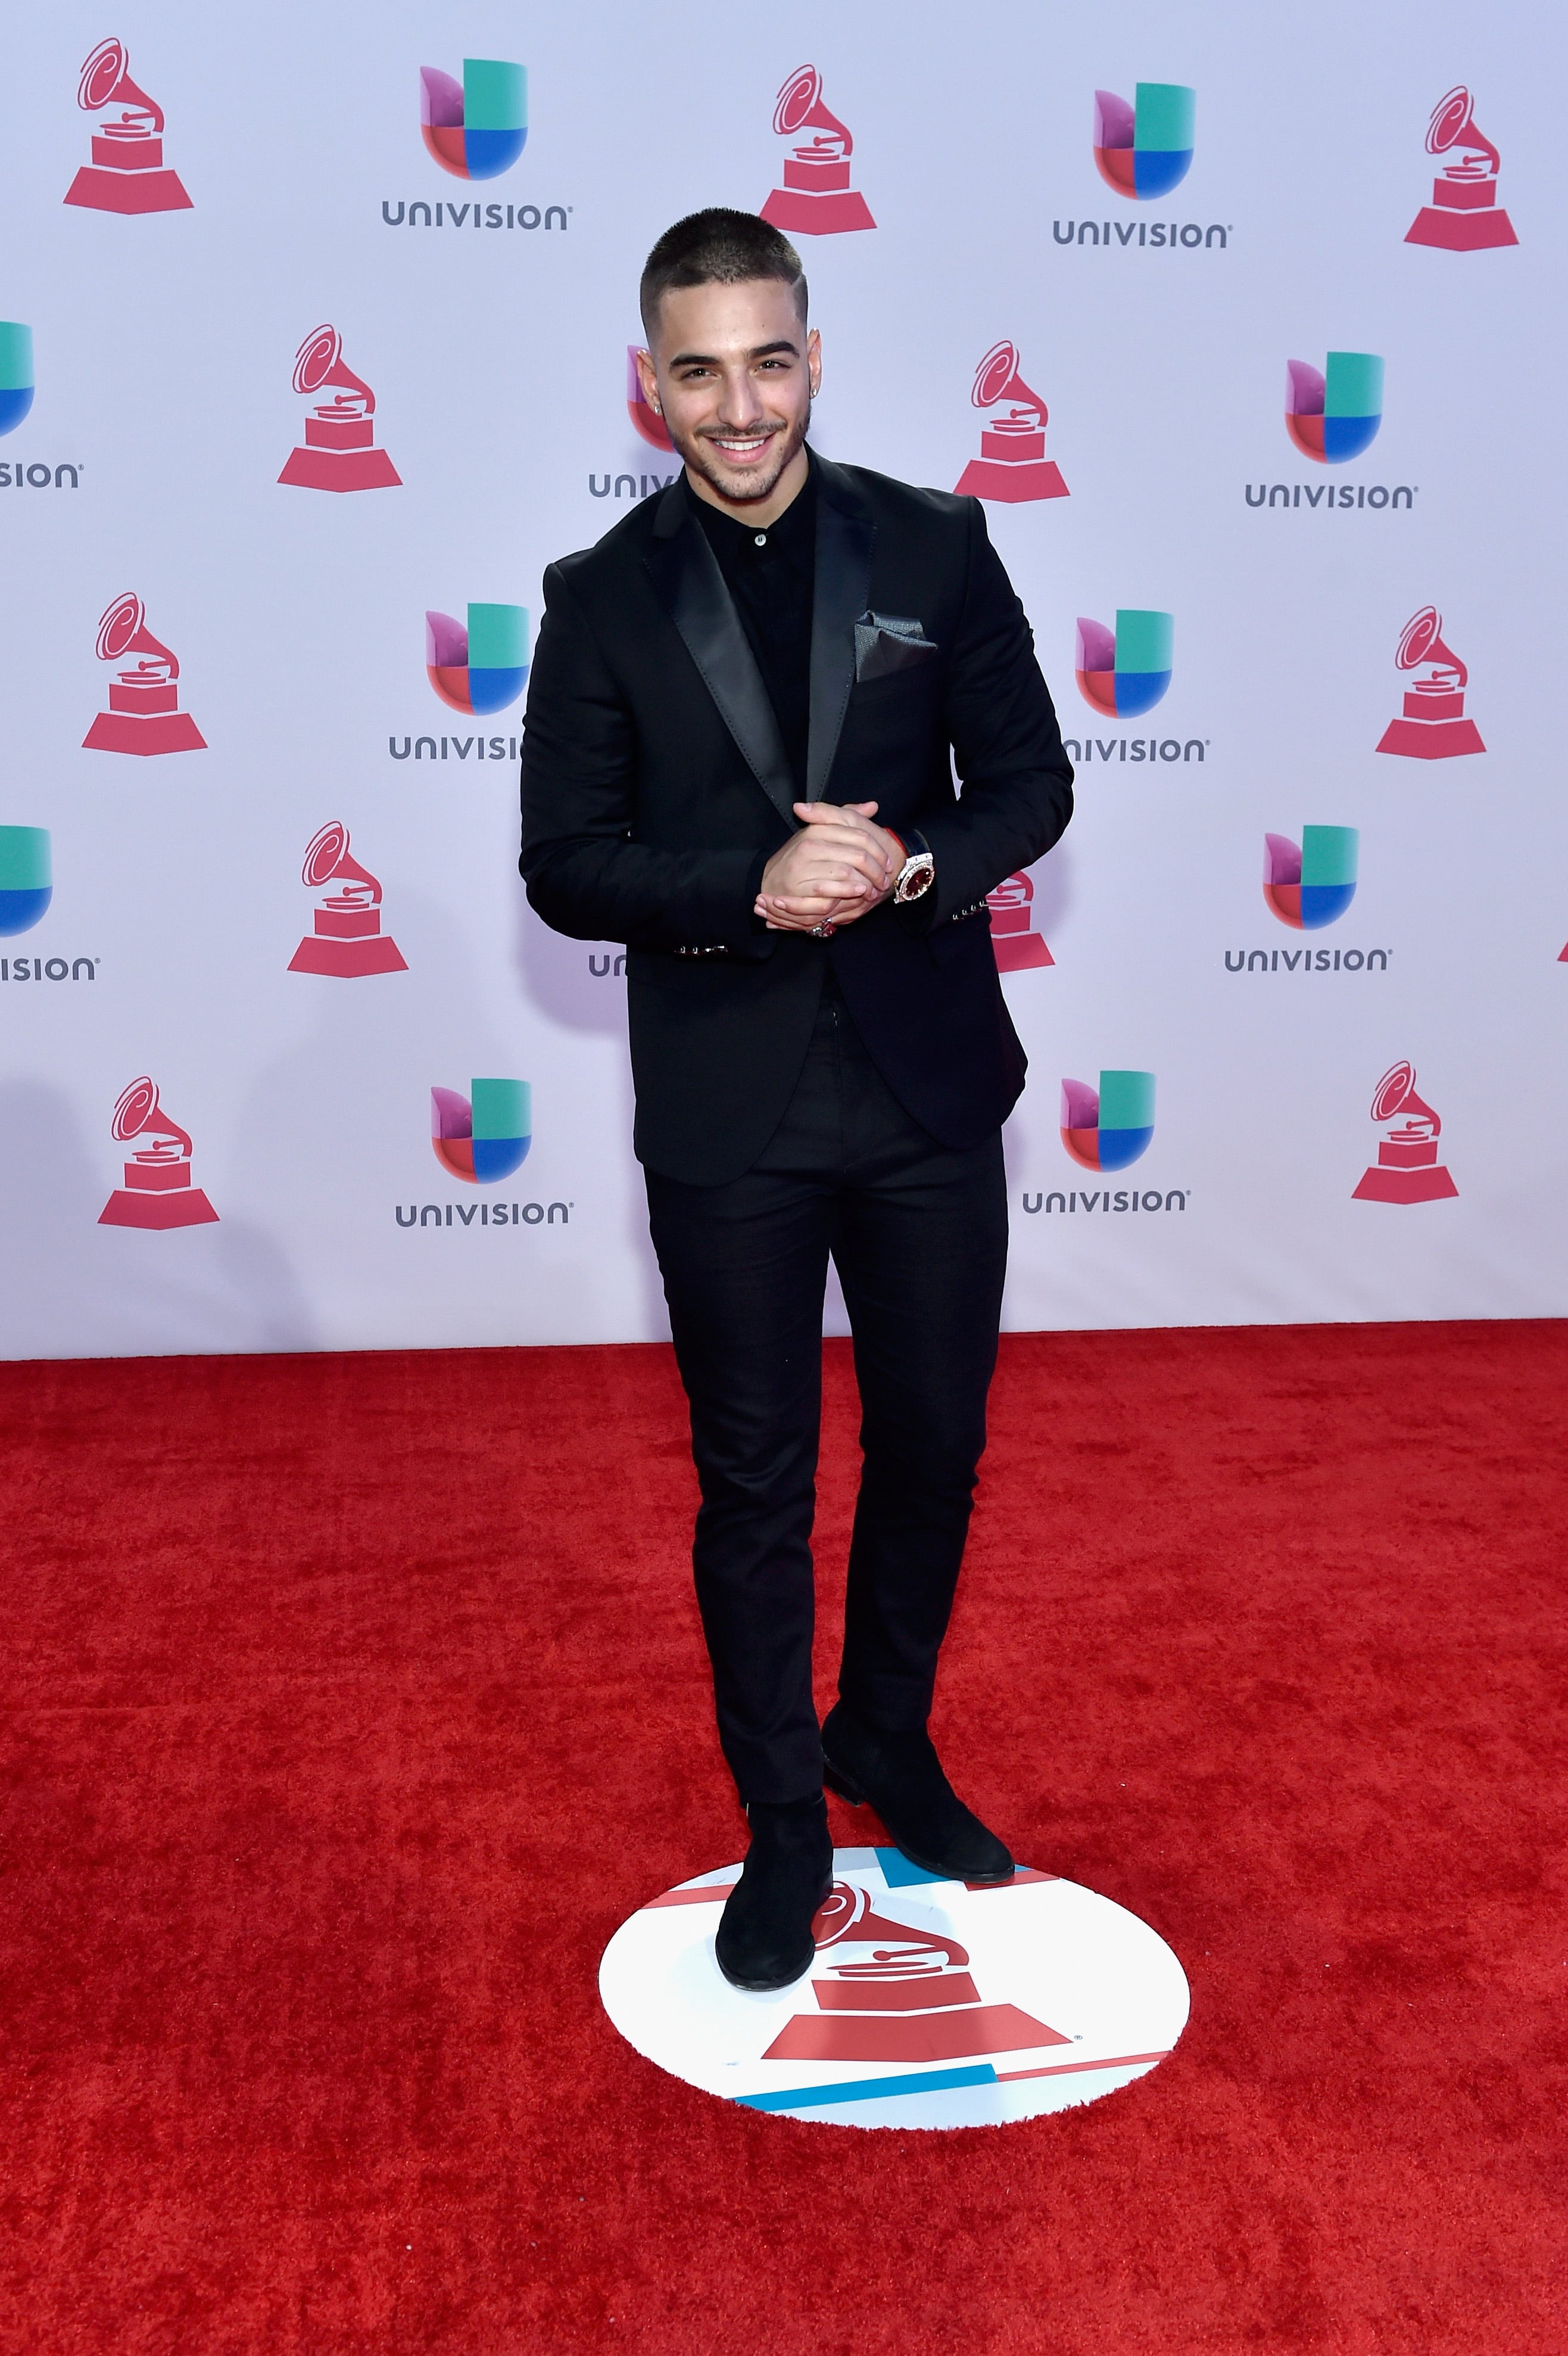 Latin Grammys Red Carpet 2017: See photos of what the stars are